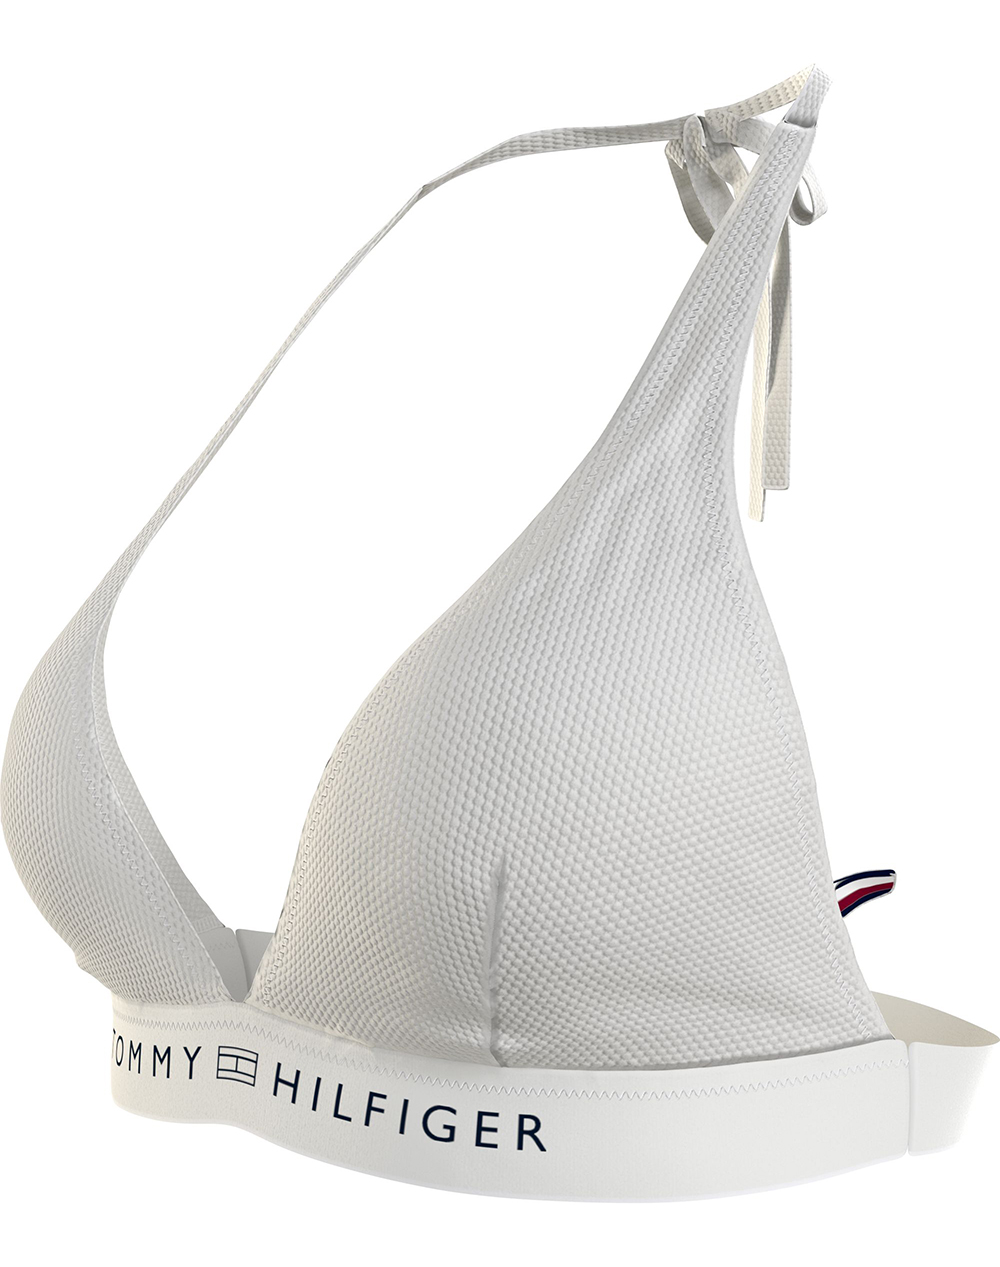 TOMMY HILFIGER TRIANGLE FIXED RP